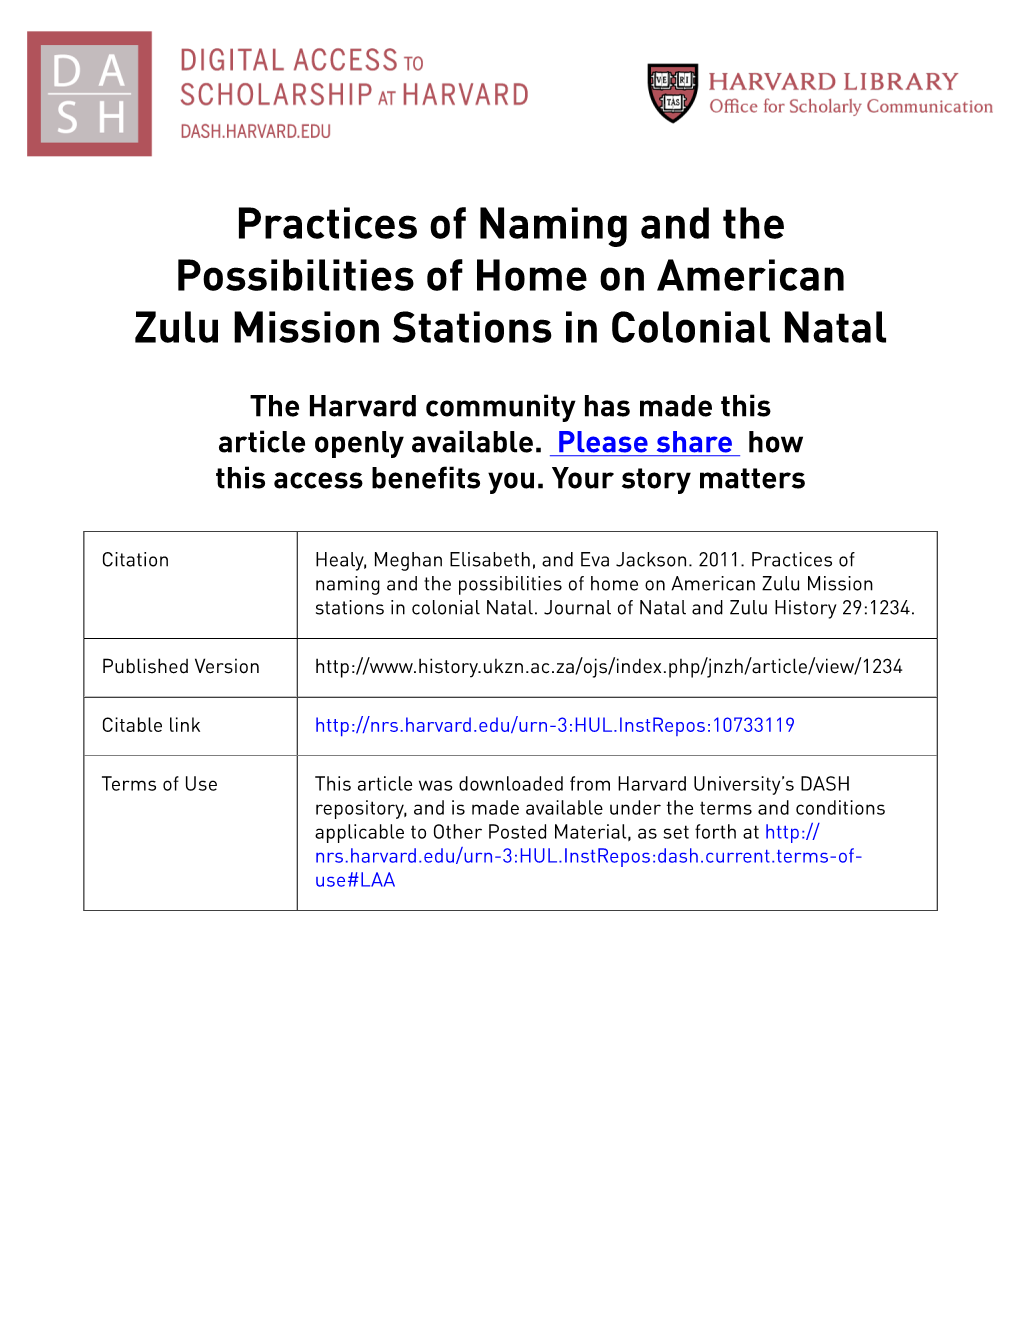 Journal of Natal and Zulu History 29:1234